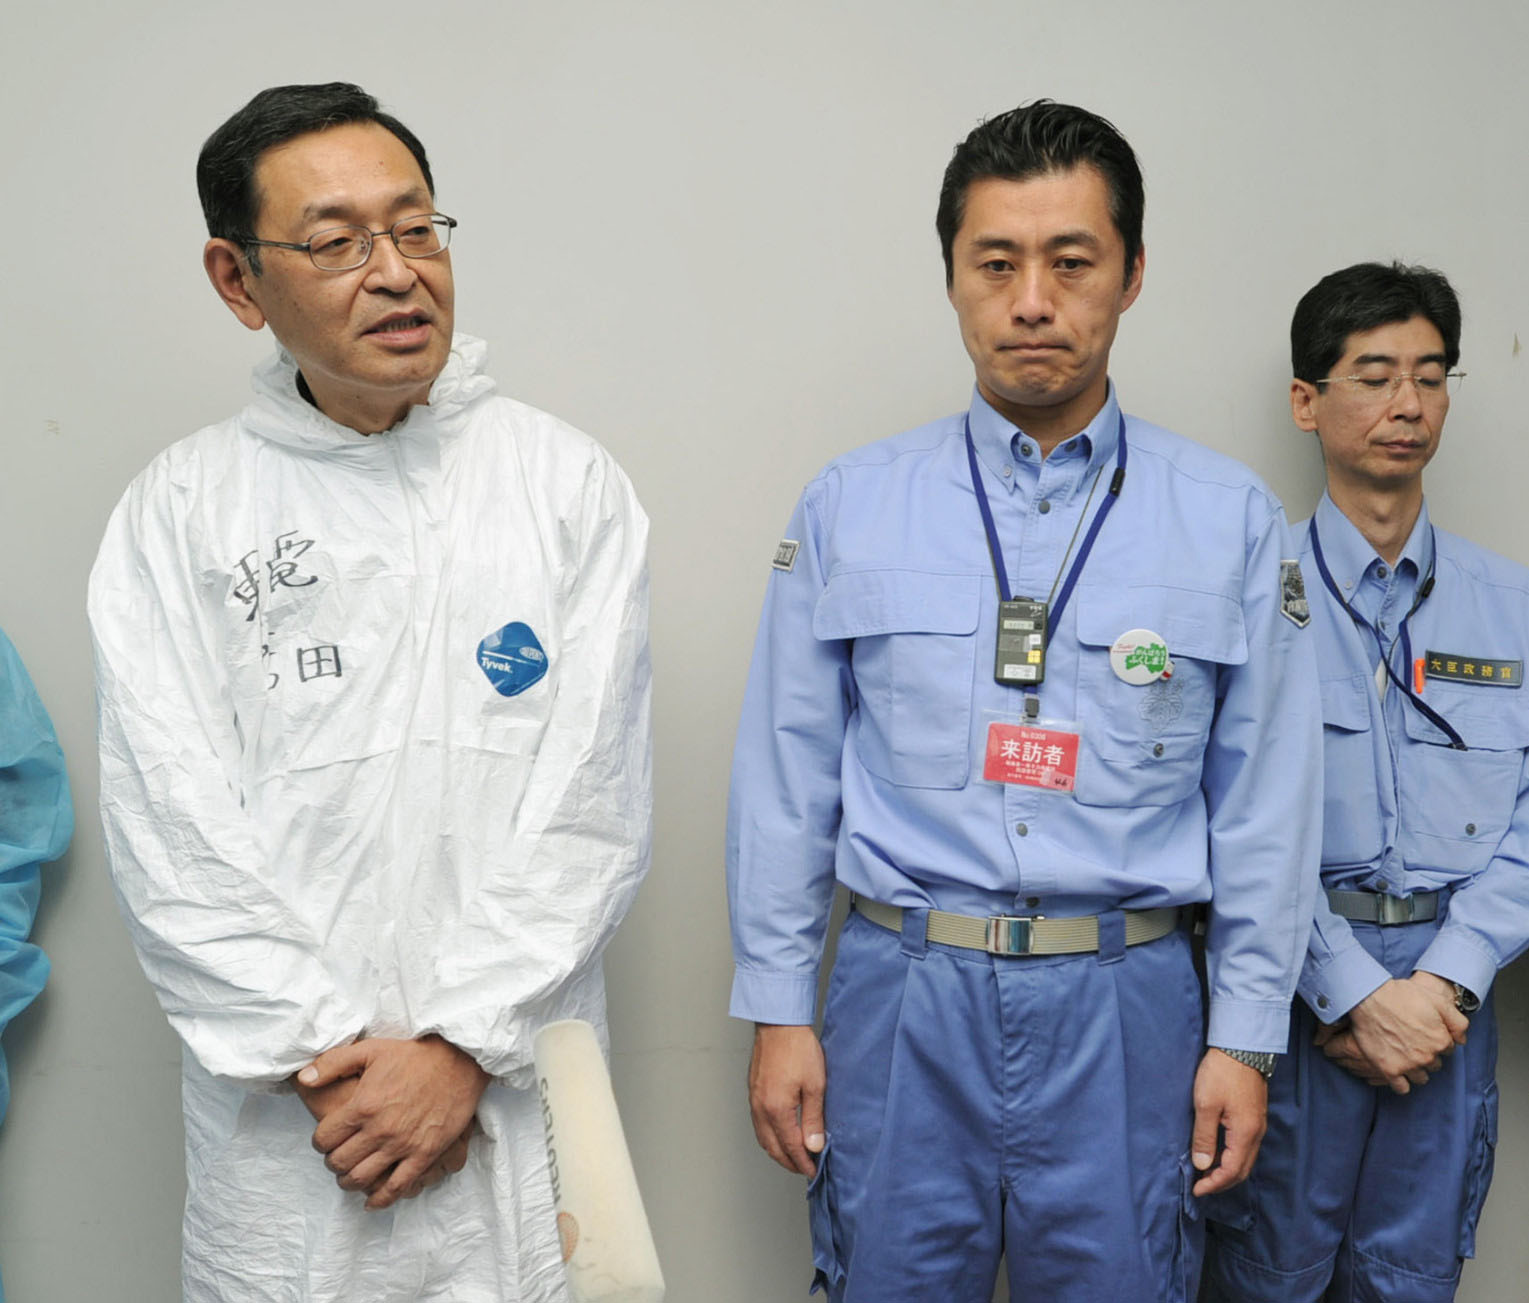 Damage control: Masao Yoshida (left), the late former chief of the Fukushima No. 1 nuclear plant, speaks to reporters at the plant in November 2011 as Goshi Hosono, then Cabinet minister in charge of the crisis, looks on. | KYODO